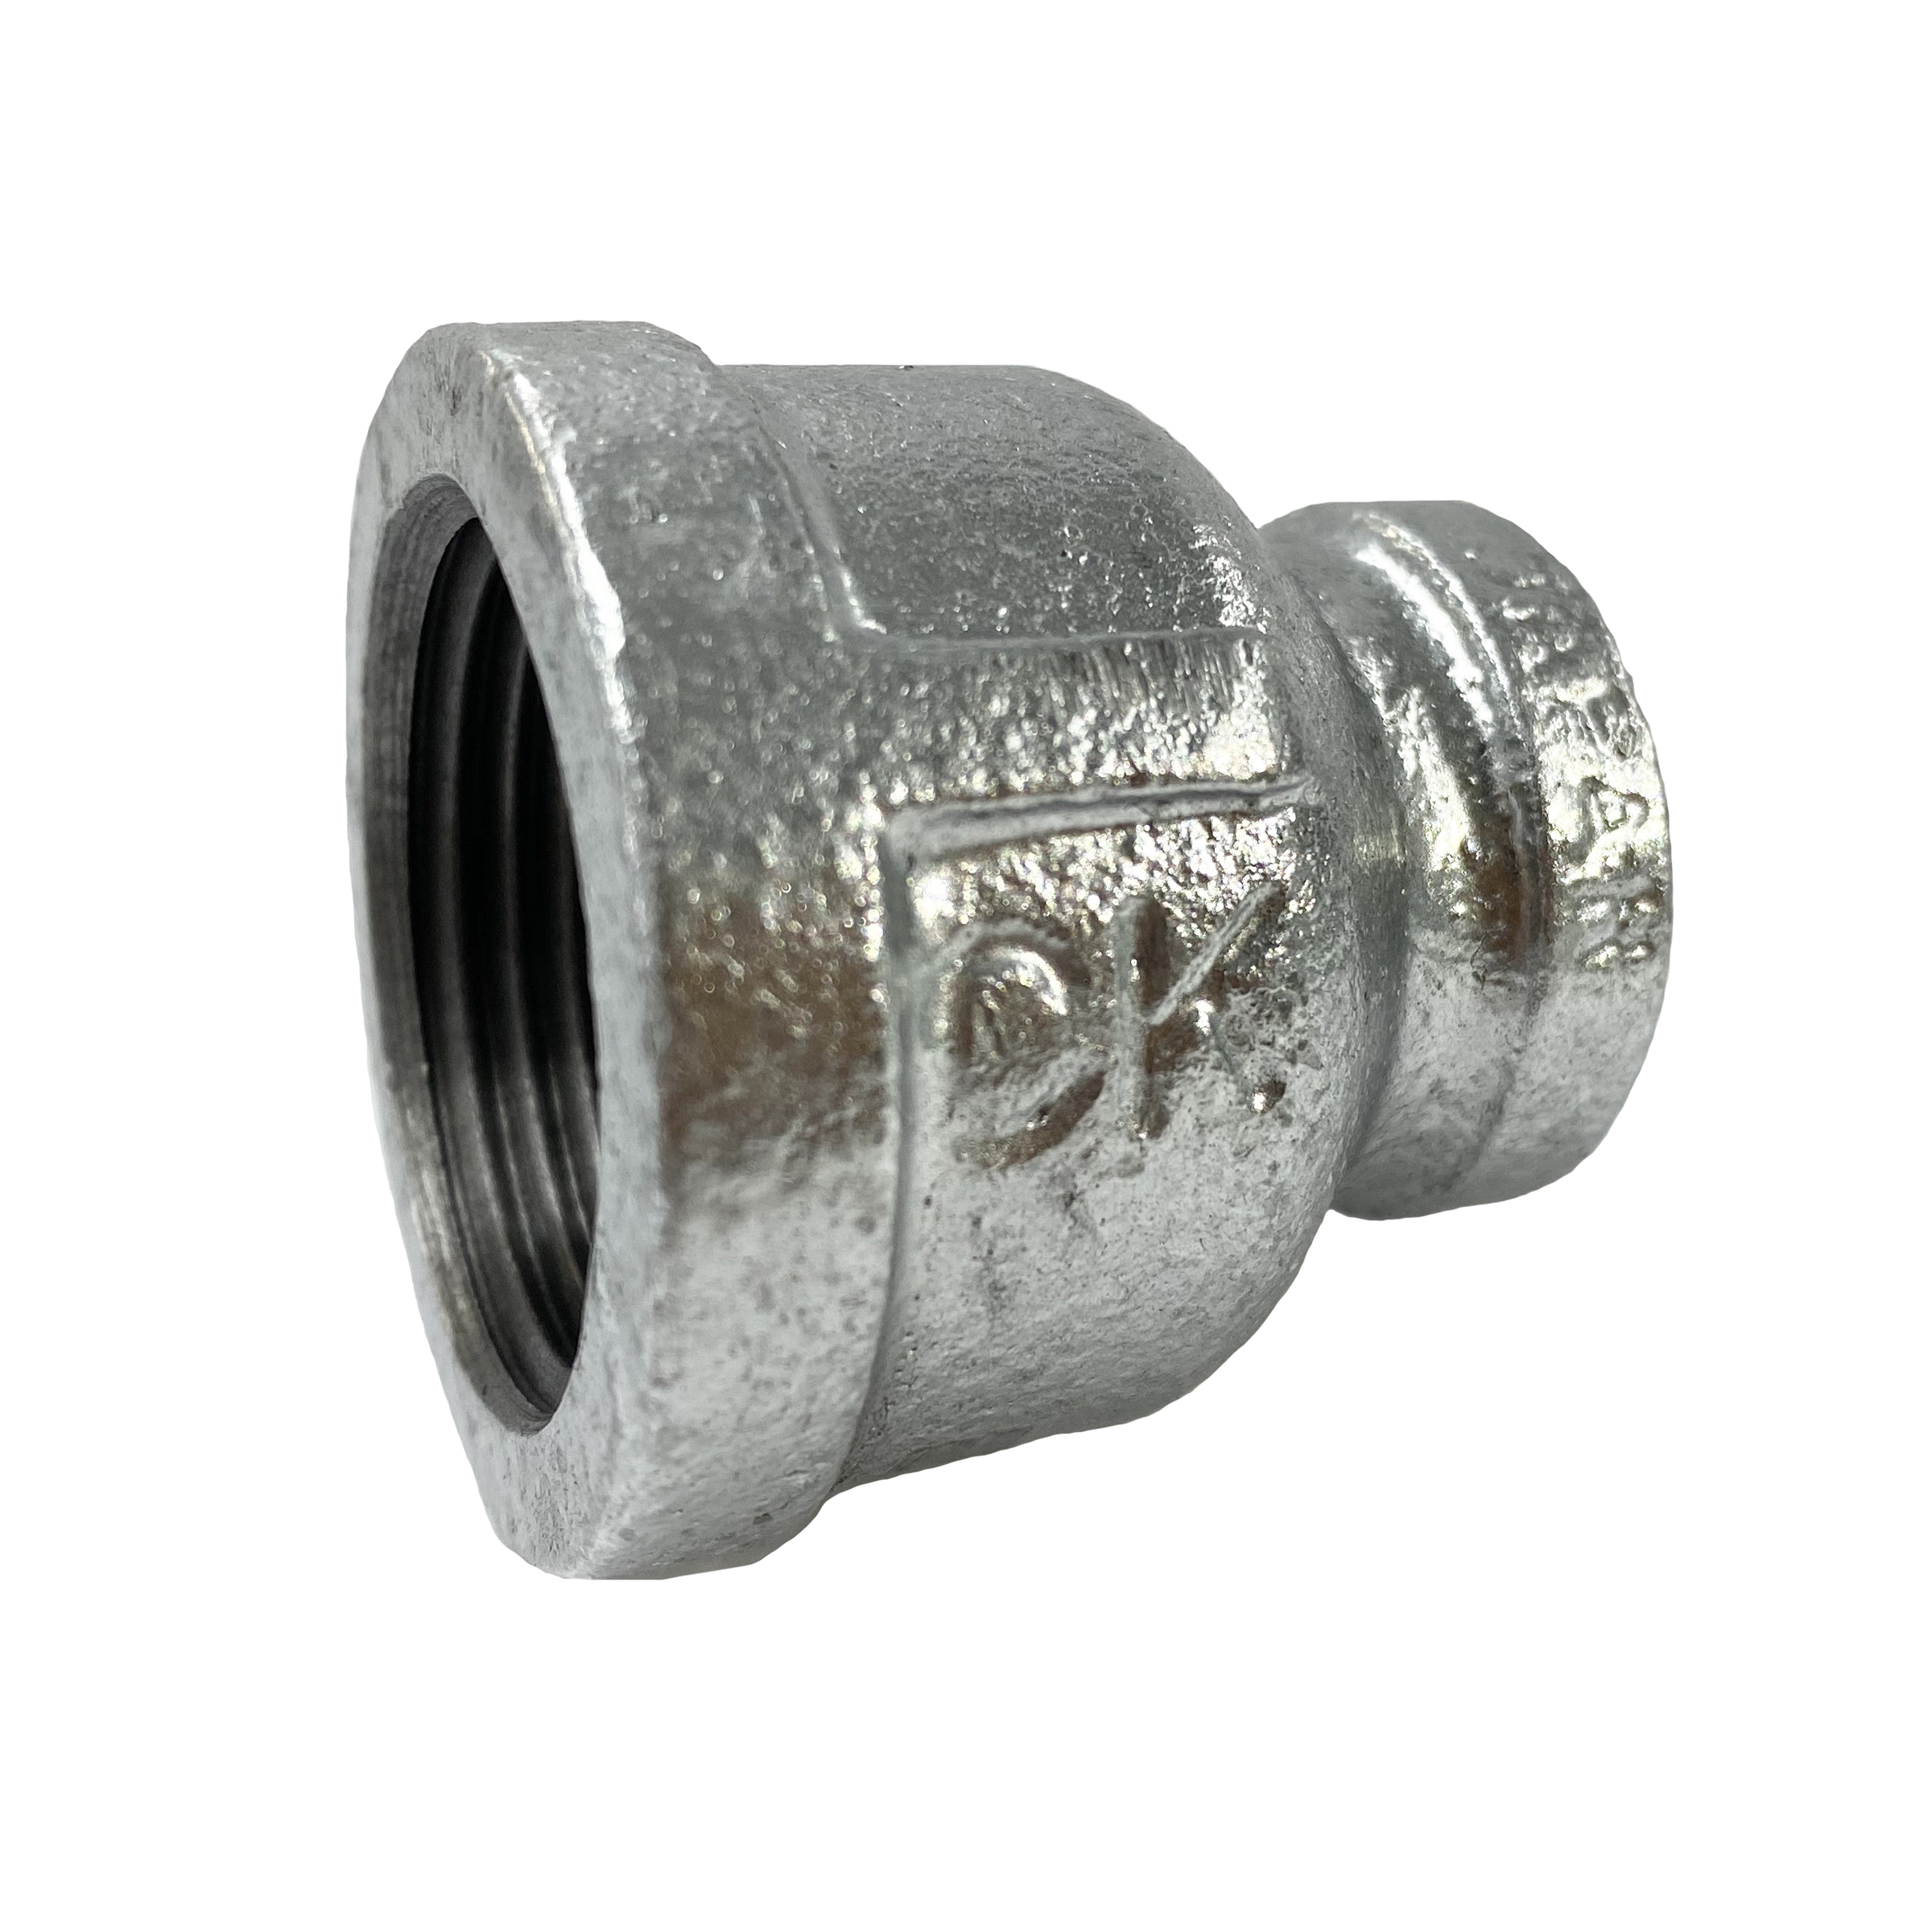 Socket Adapter Fitting with Band for Galvanized Cast Iron Pipe - Threaded